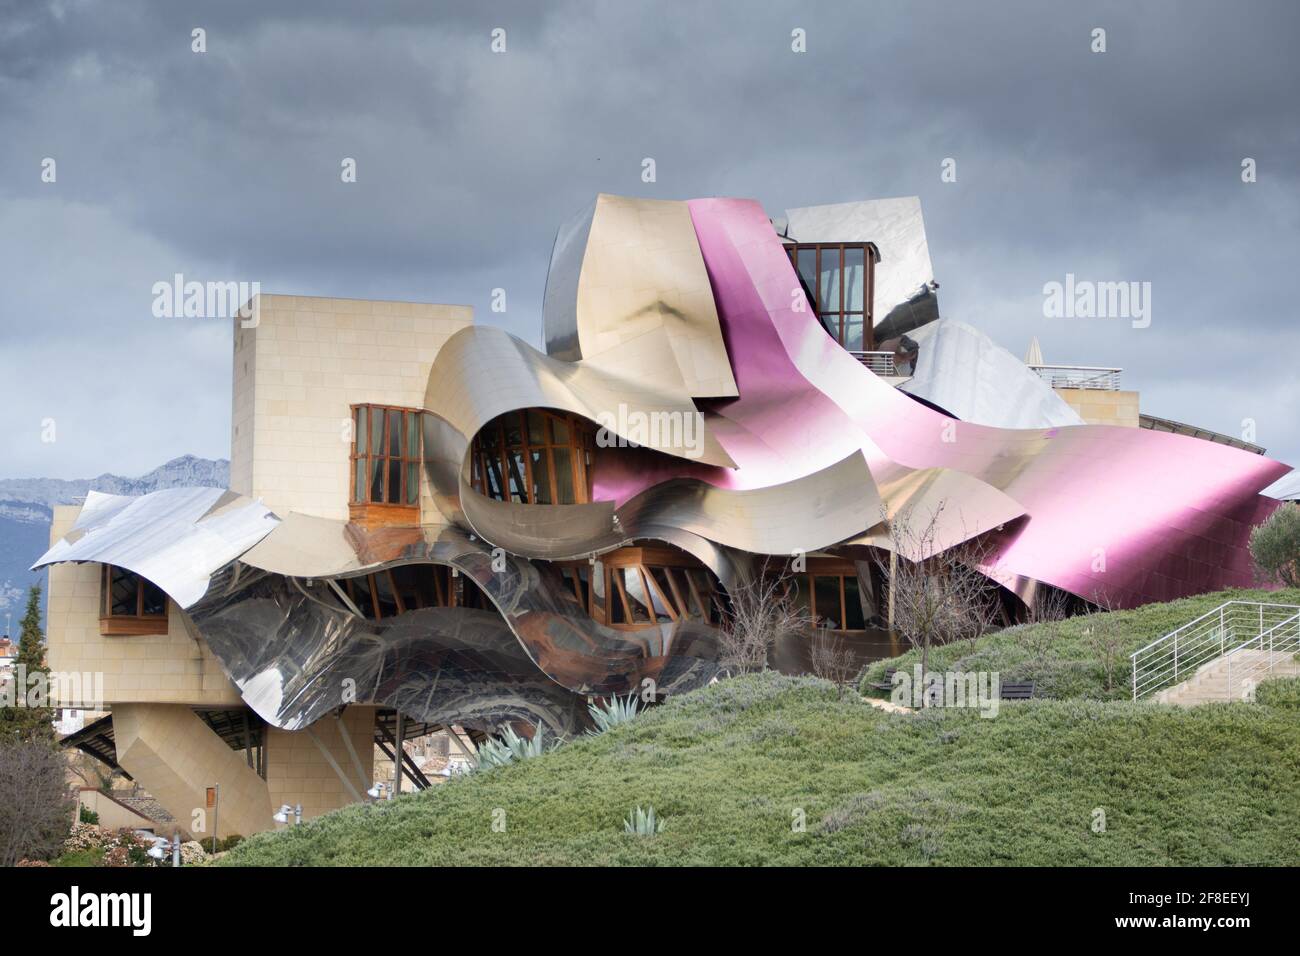 EL CIEGO, ÁLAVA, SPAIN - Feb 27, 2016: Marques de Riscal Winery designed by Architect Fran Ghery. Picture taken during a guided tour in 2016 Stock Photo